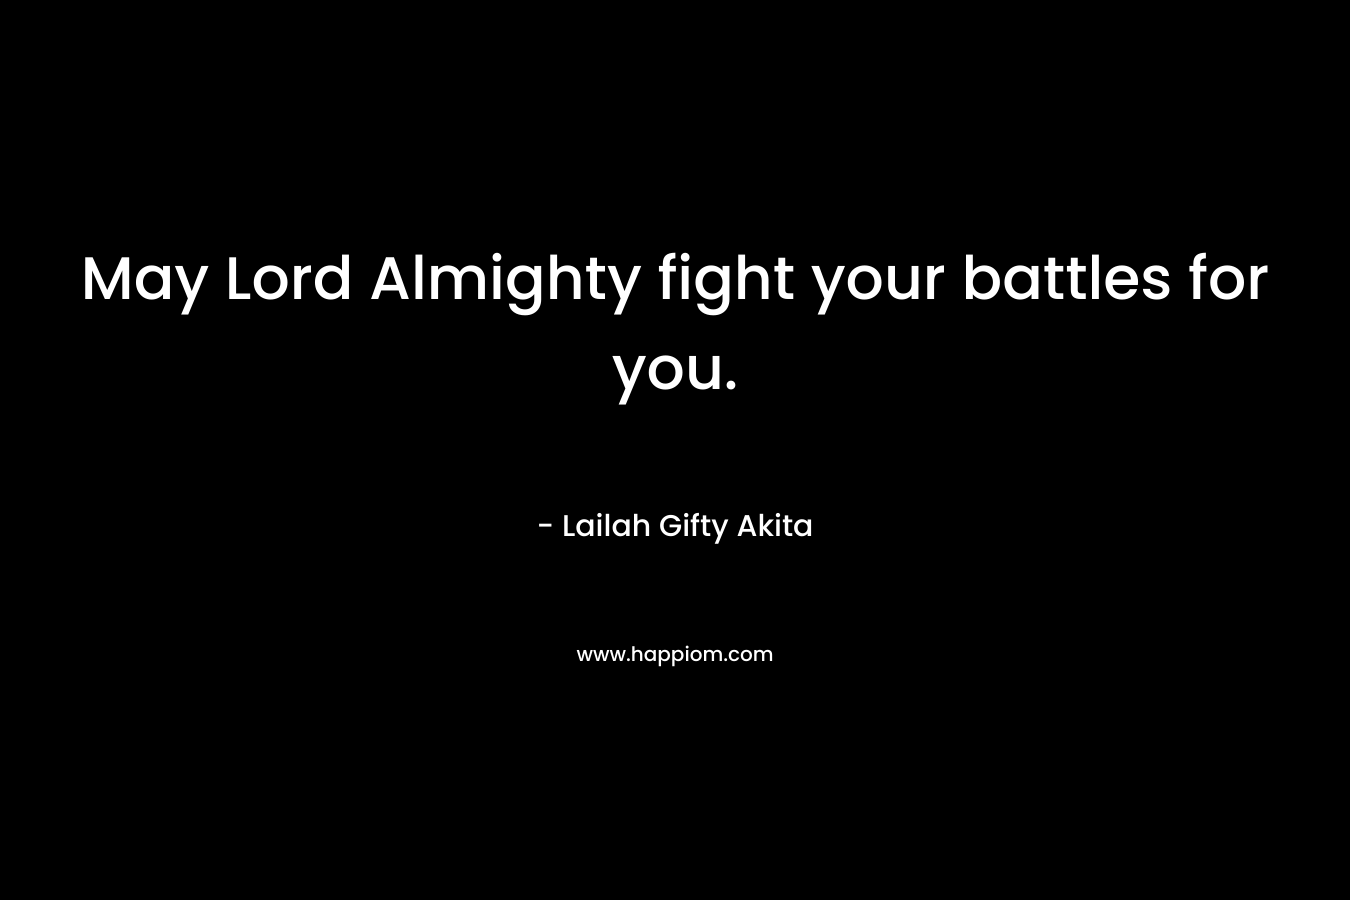 May Lord Almighty fight your battles for you.